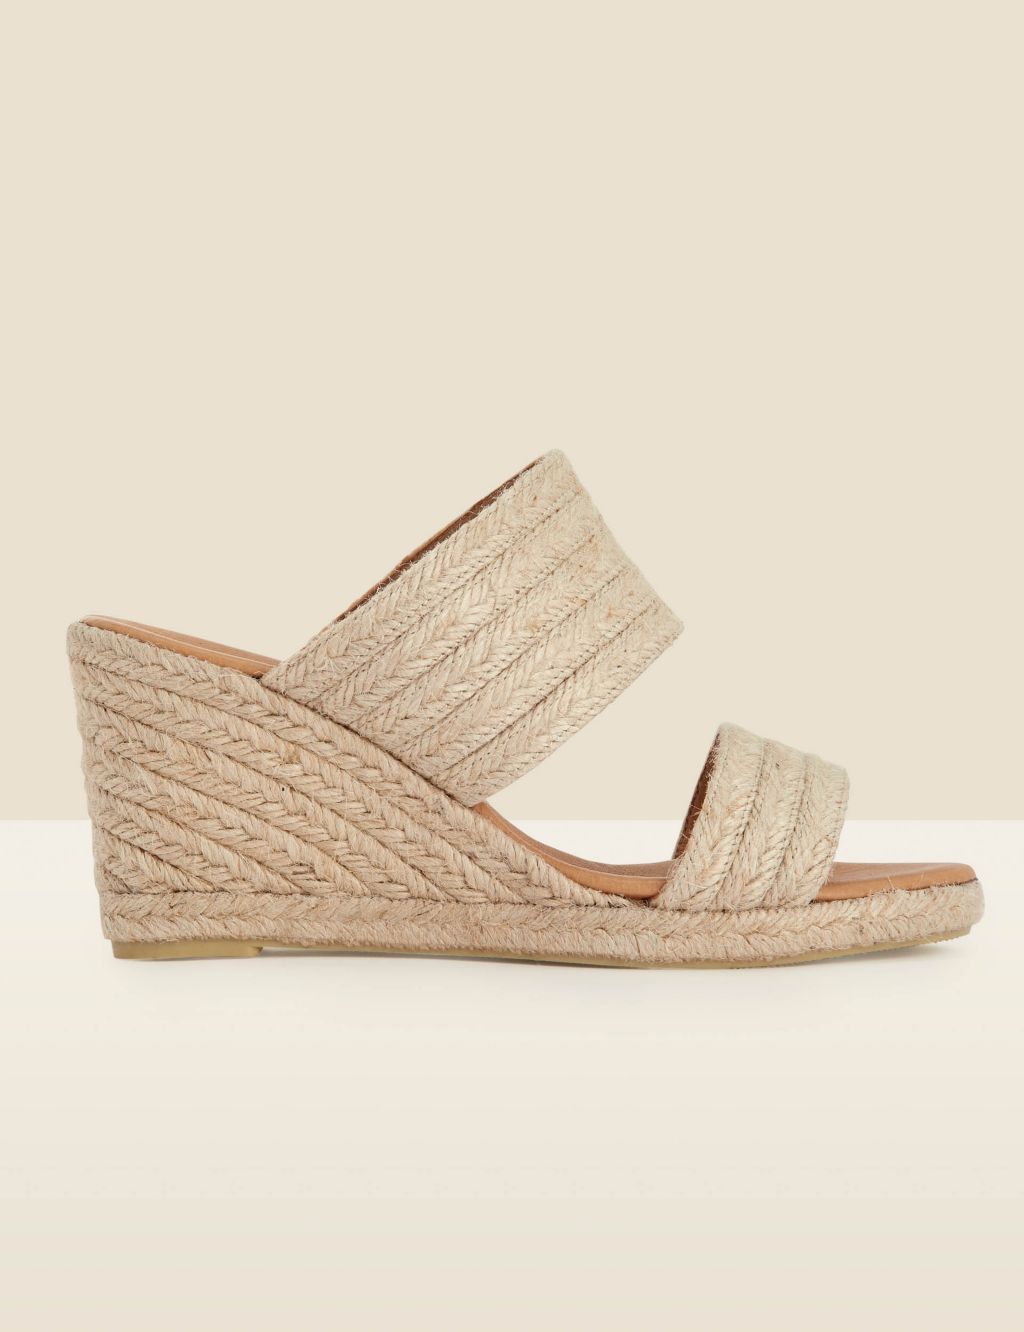 Woven Wedge Espadrille Mules image 1